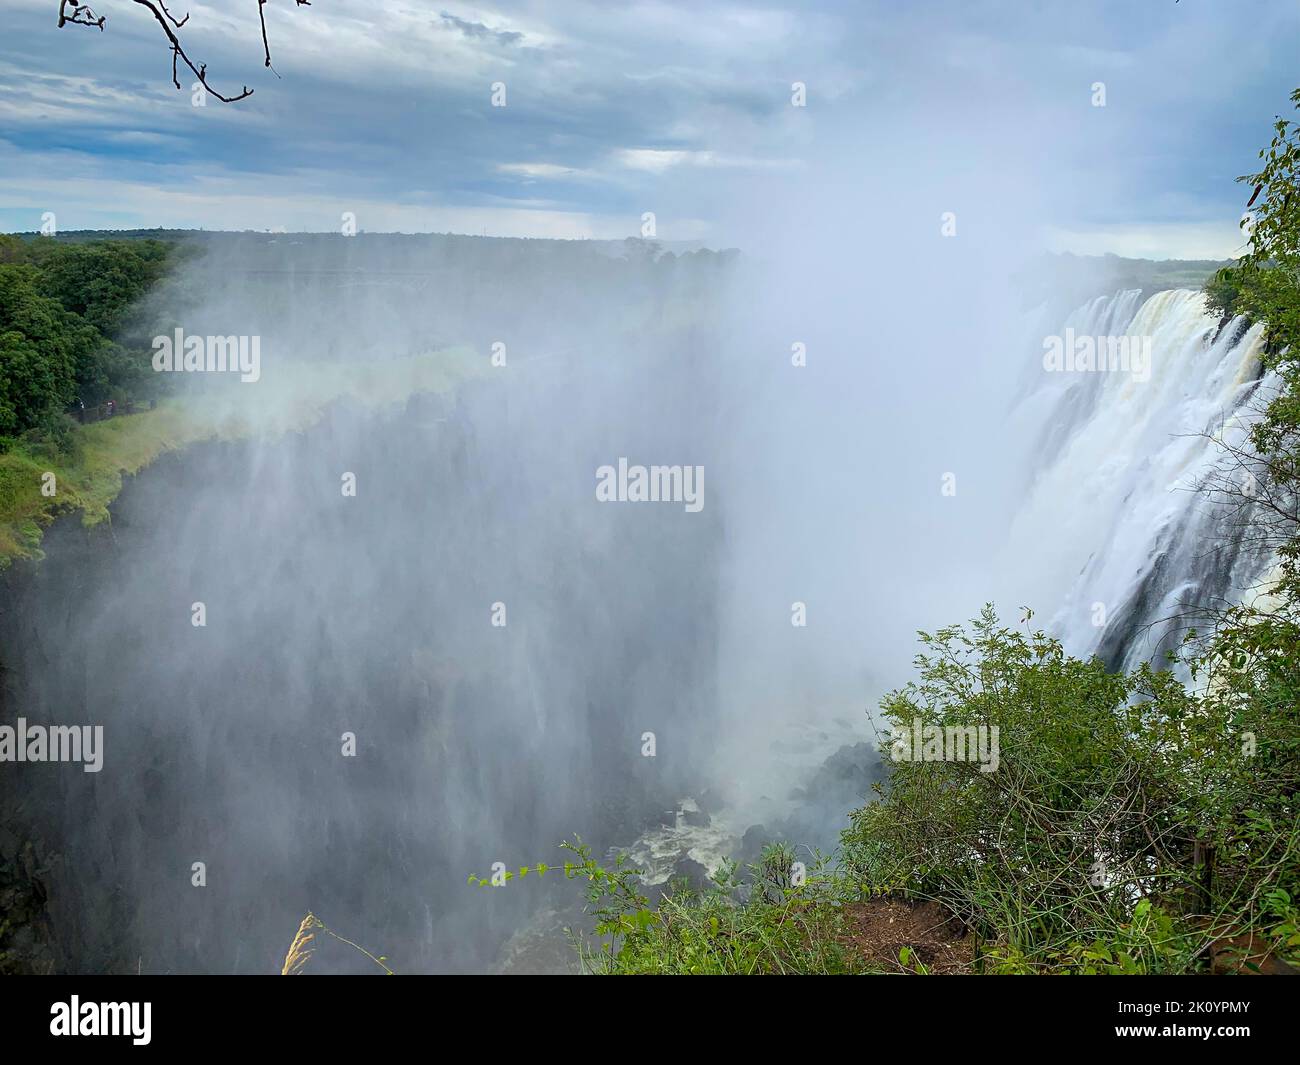 Victoria Falls at rainy season with lots of water and mist Stock Photo